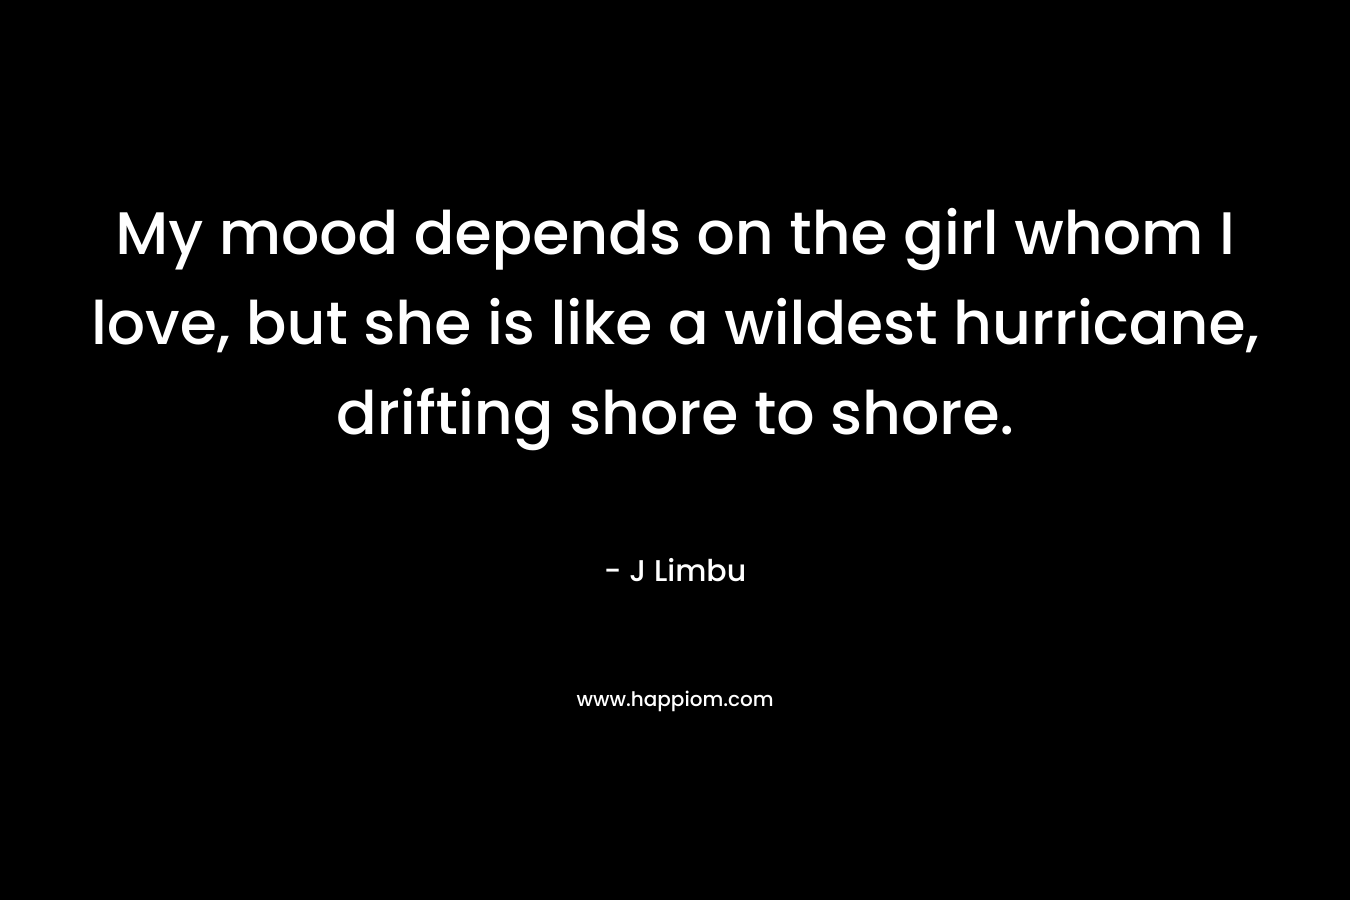 My mood depends on the girl whom I love, but she is like a wildest hurricane, drifting shore to shore. – J Limbu